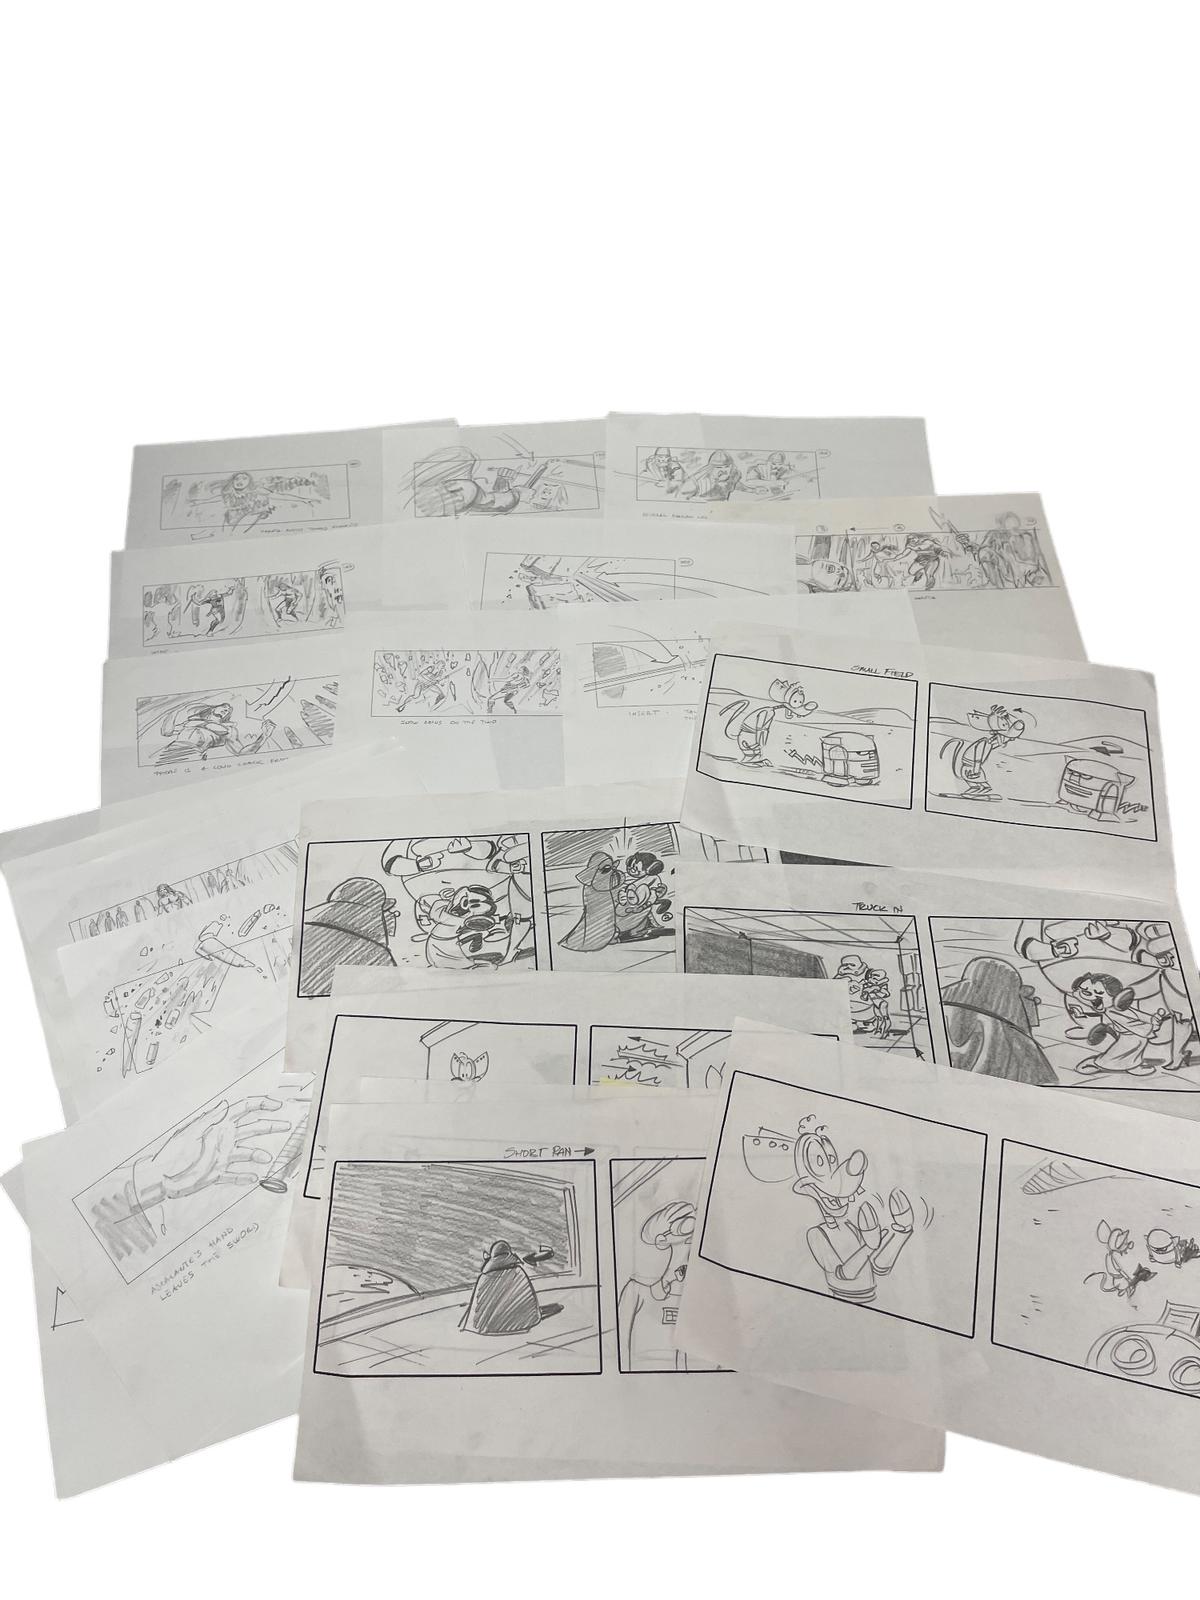 ORIGINAL RARE THE ANIMATION PRODUCTION STORY BOARD DRAWING COLLECTION LOT